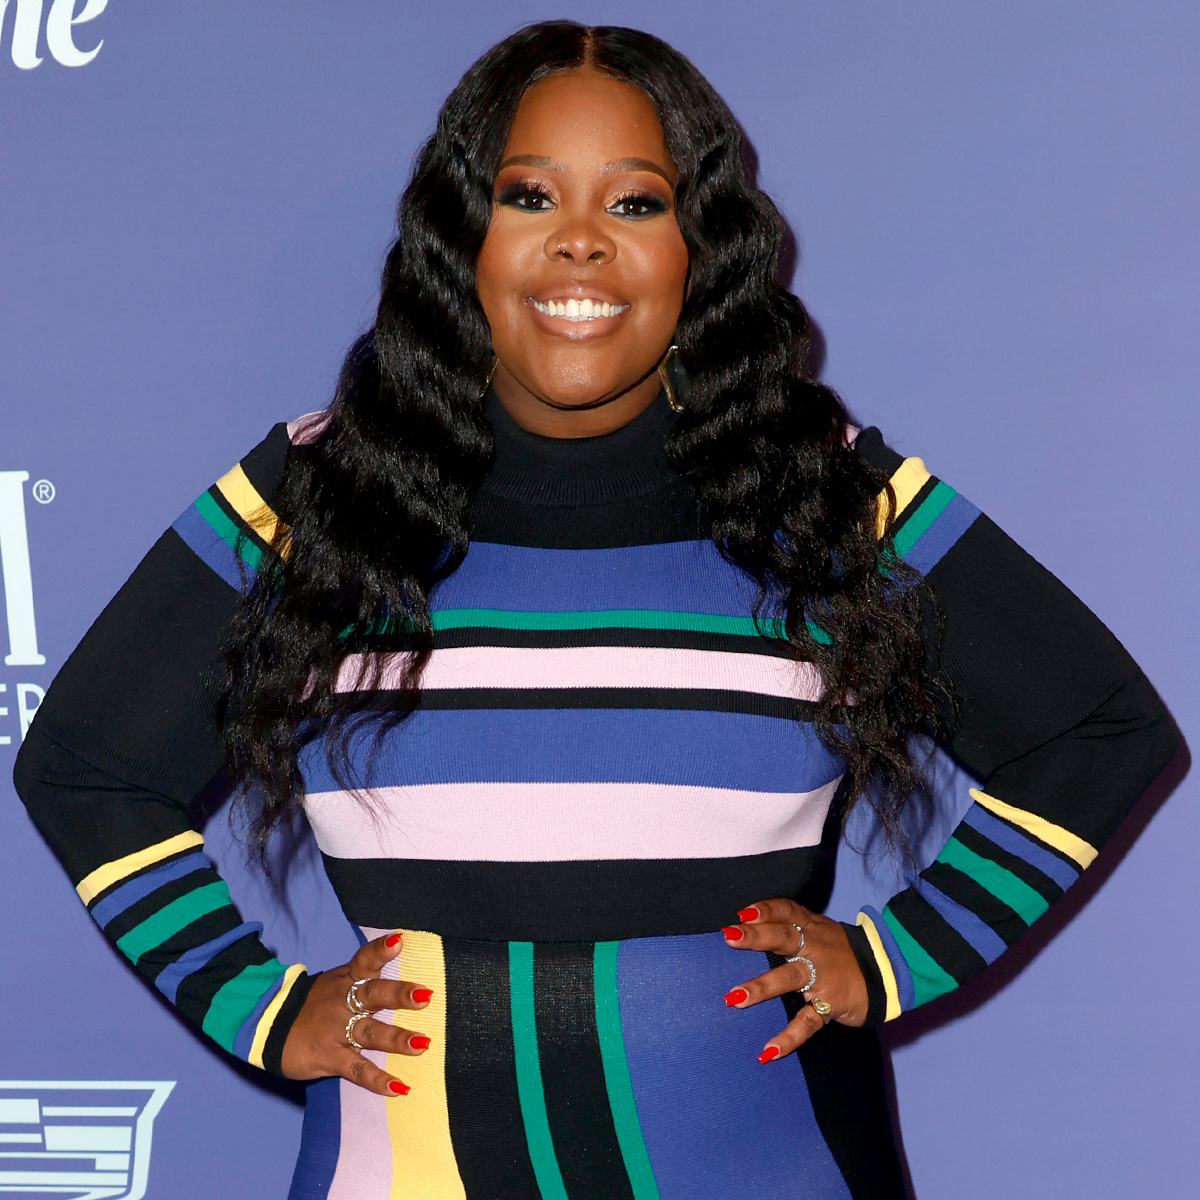 Amber Riley Celebrates the 'Triumph' of Black Beauty in New Docuseries